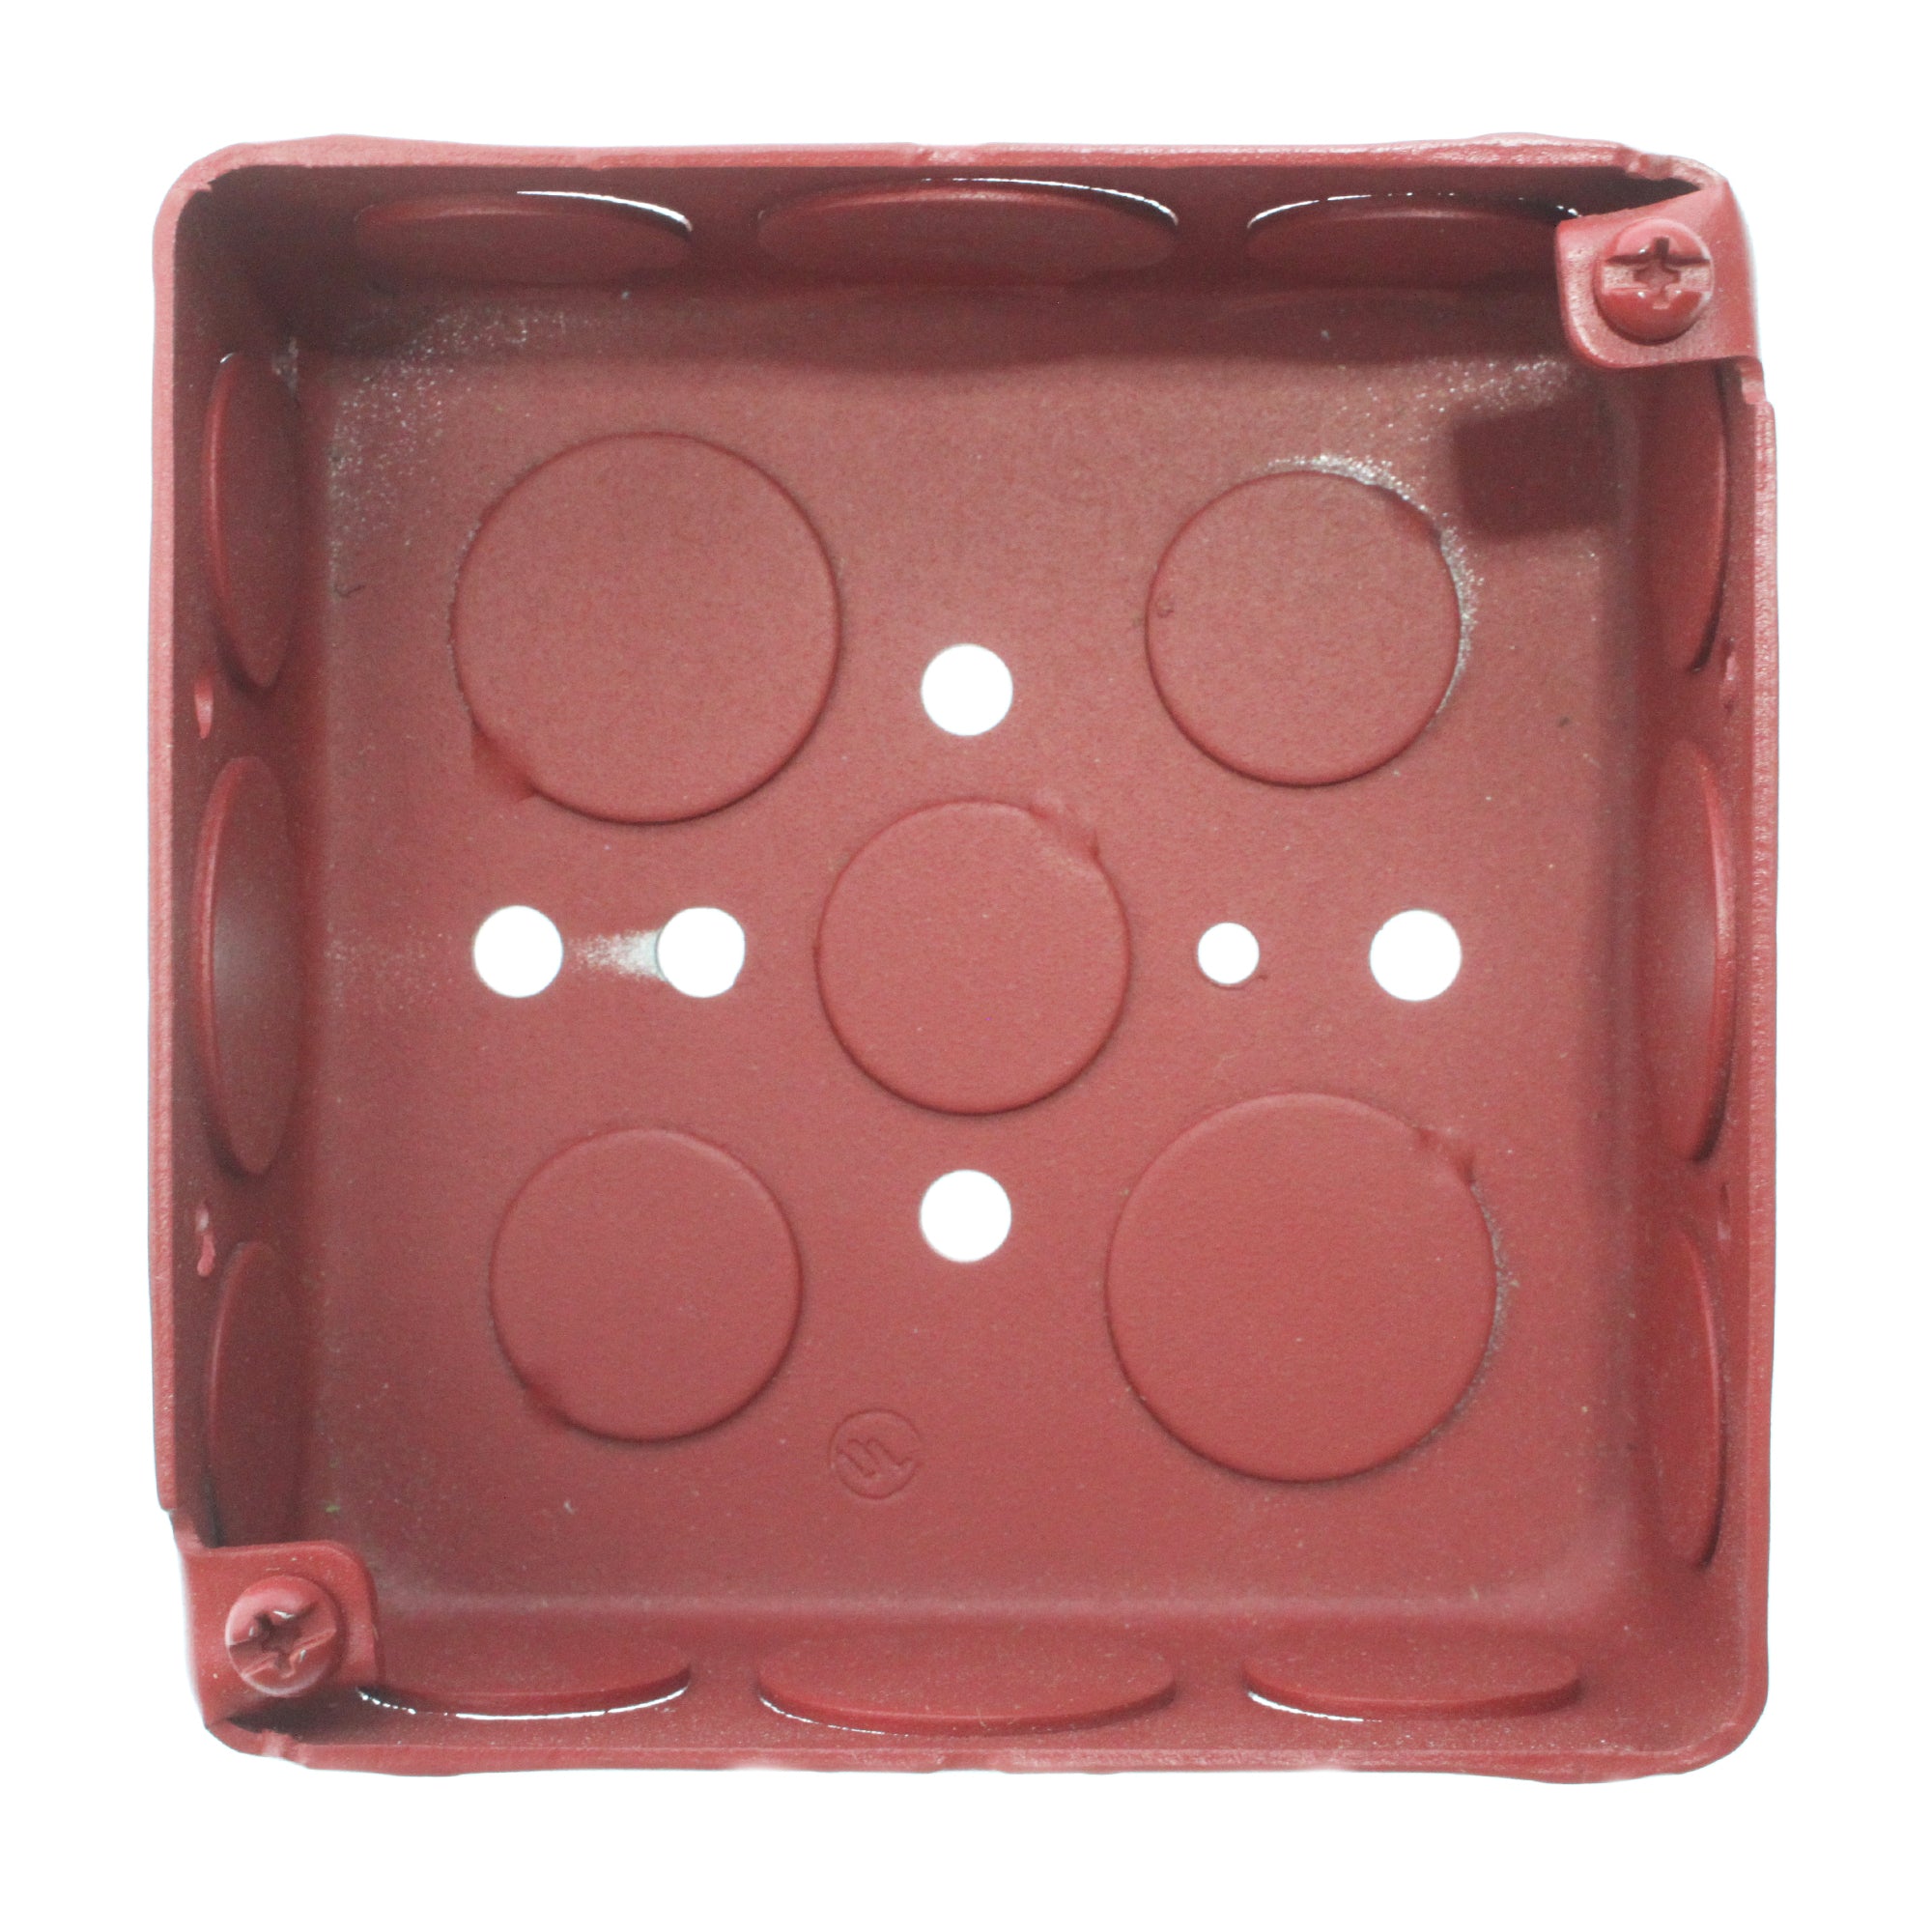 Gamewell-FCI, FCI GAMEWELL BBR 139-3101F FIRE ALARM SURFACE MOUNT DEVICE BACK-BOX, STEEL, RED